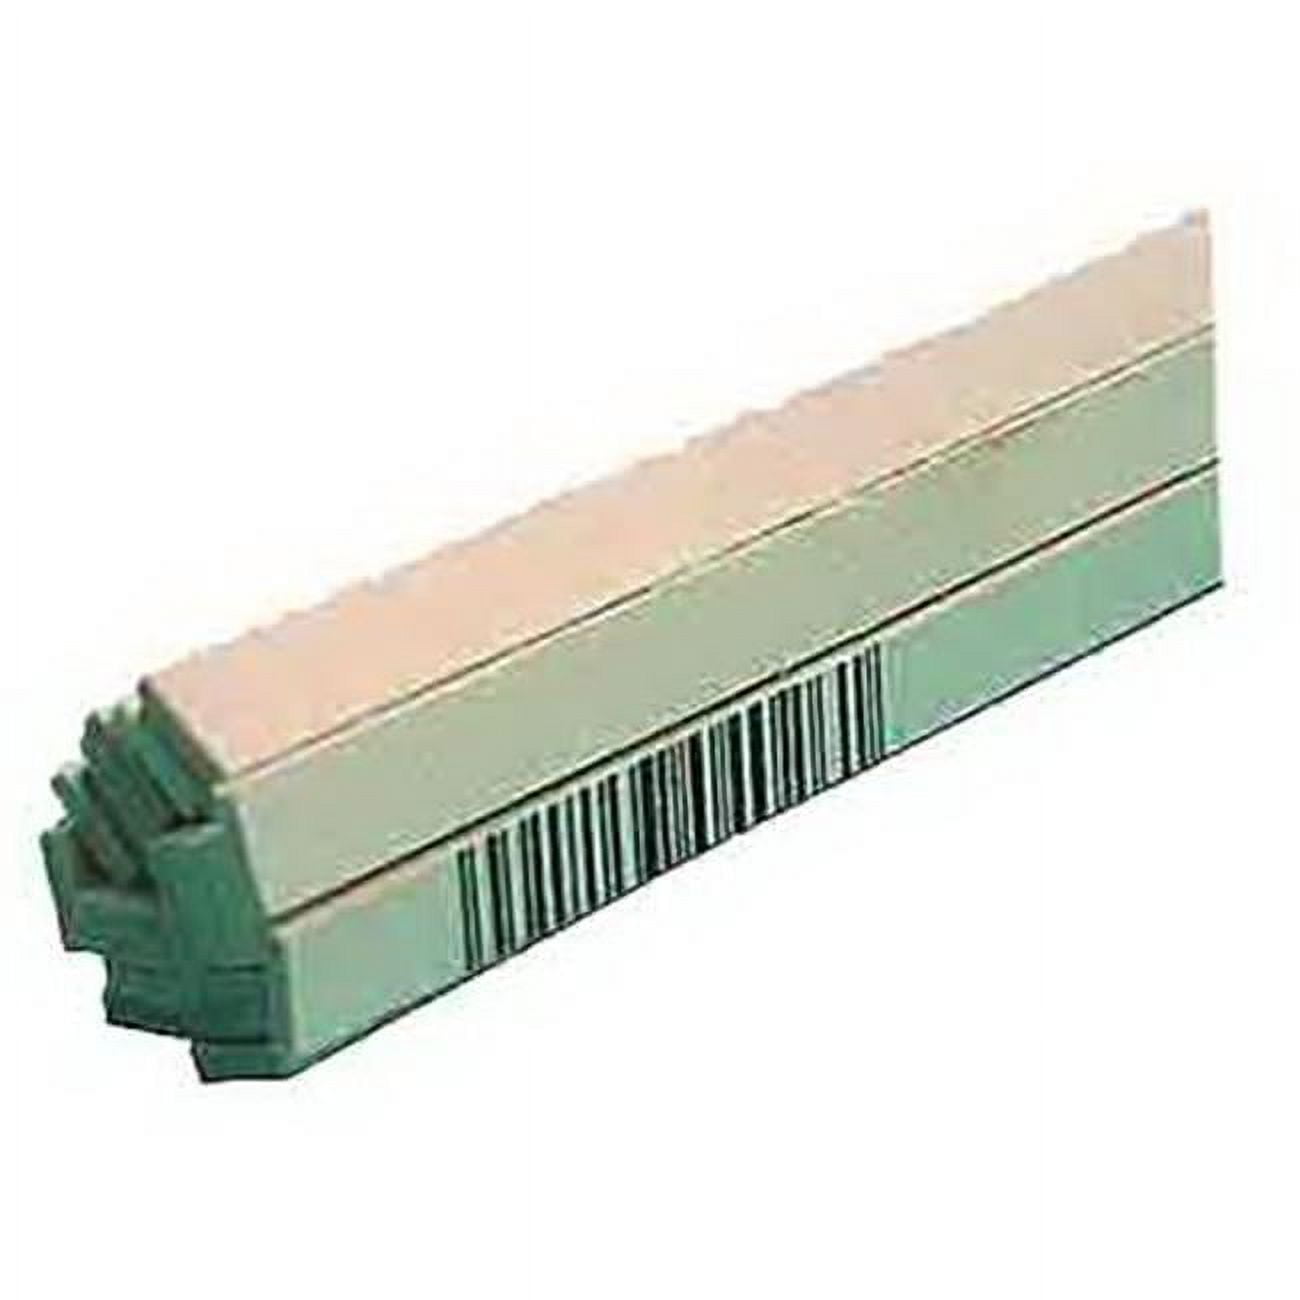 Midwest 6049 15-Count Pack of 1/8 x 1/2 x 36 Kiln Dried Balsa Wood Strips  